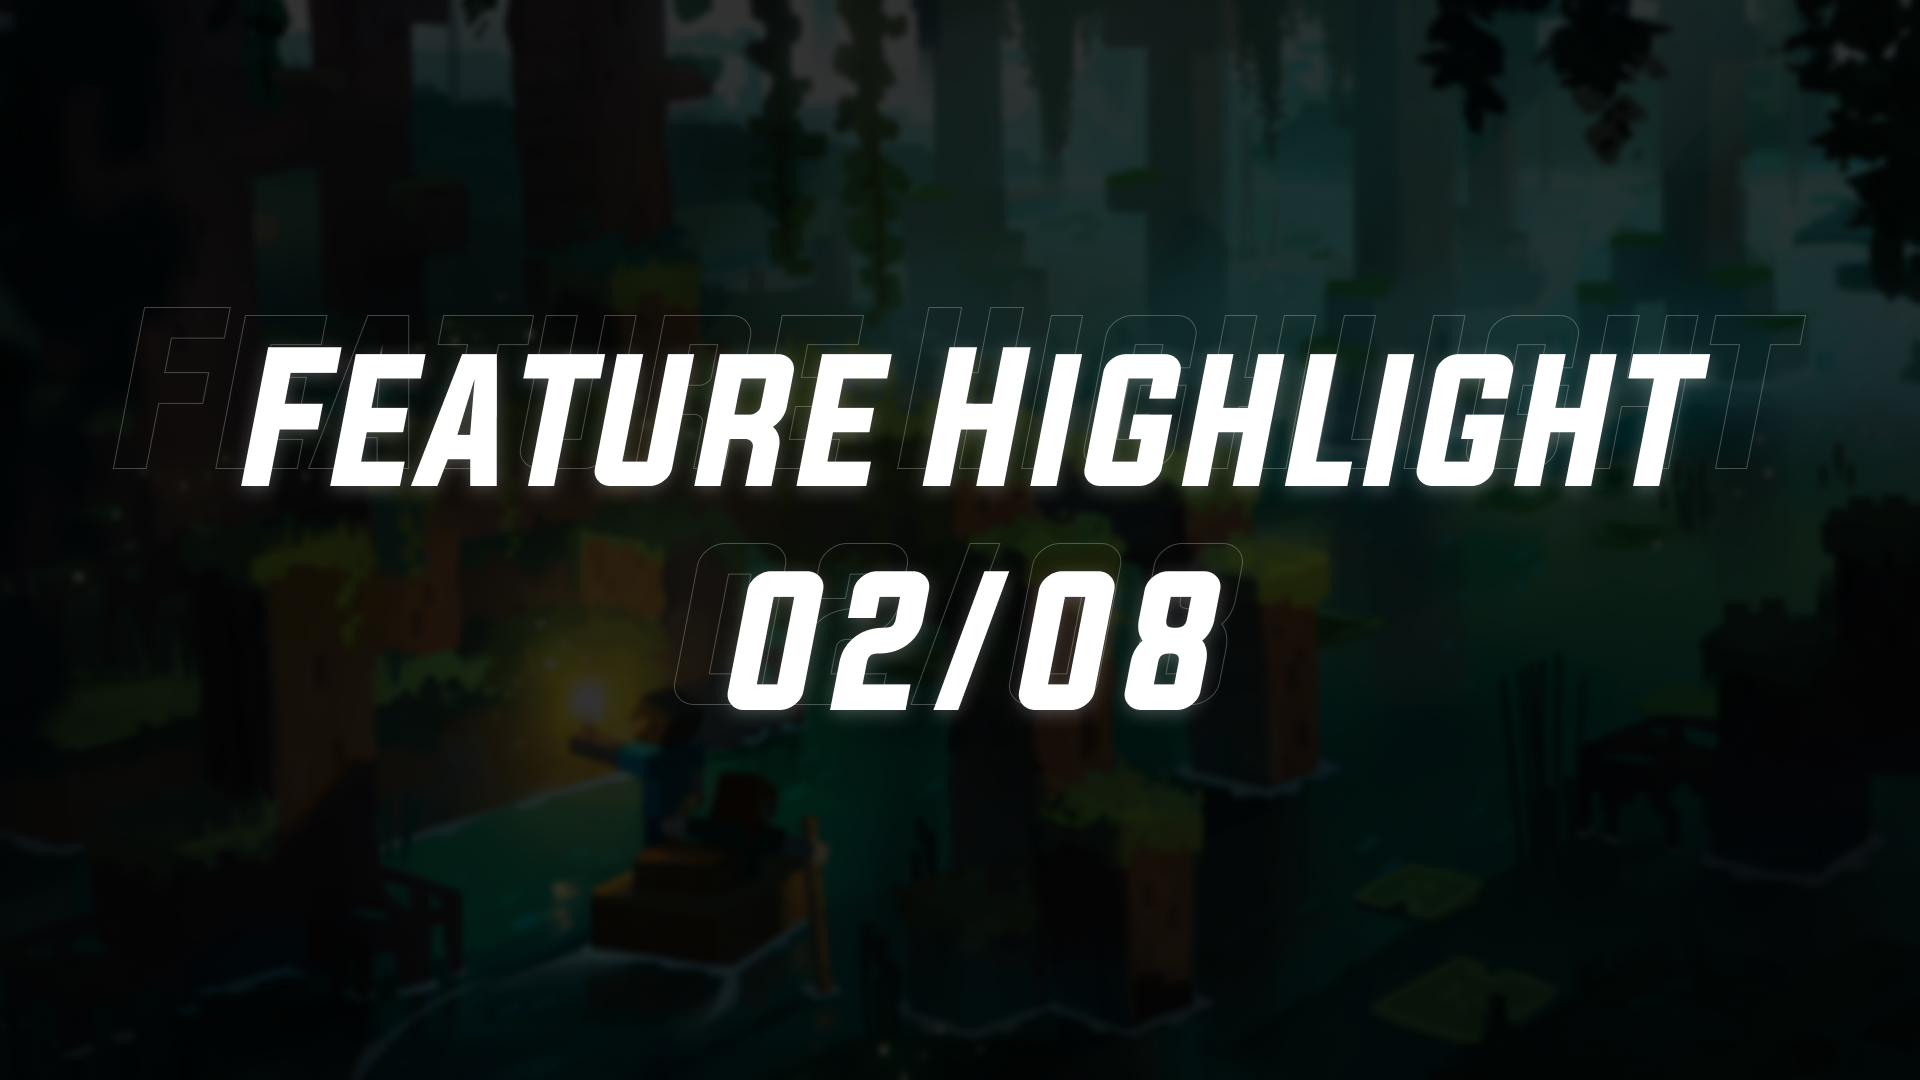 Feature Highlight 02/08